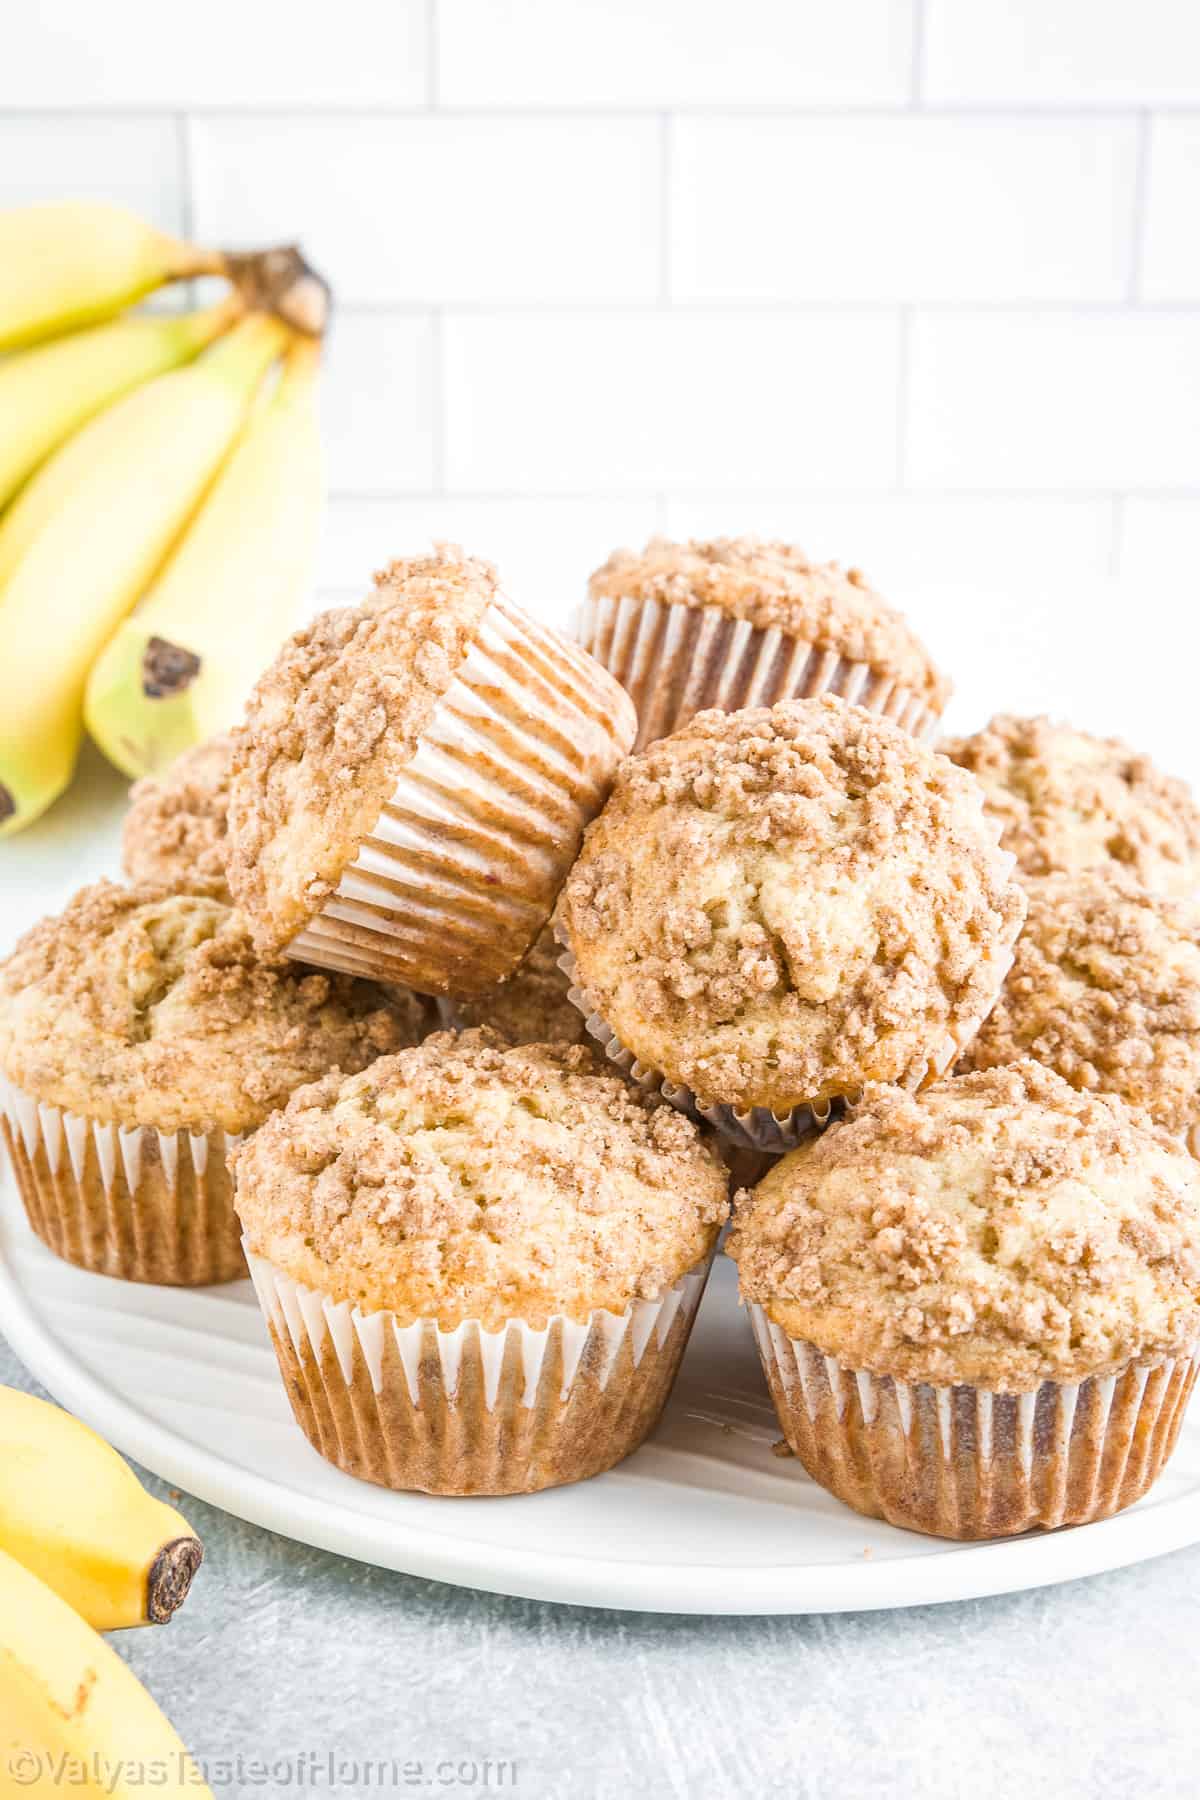 These muffins will become a family favorite in no time. They're great for breakfast, dessert, or a sweet treat in a lunchbox.